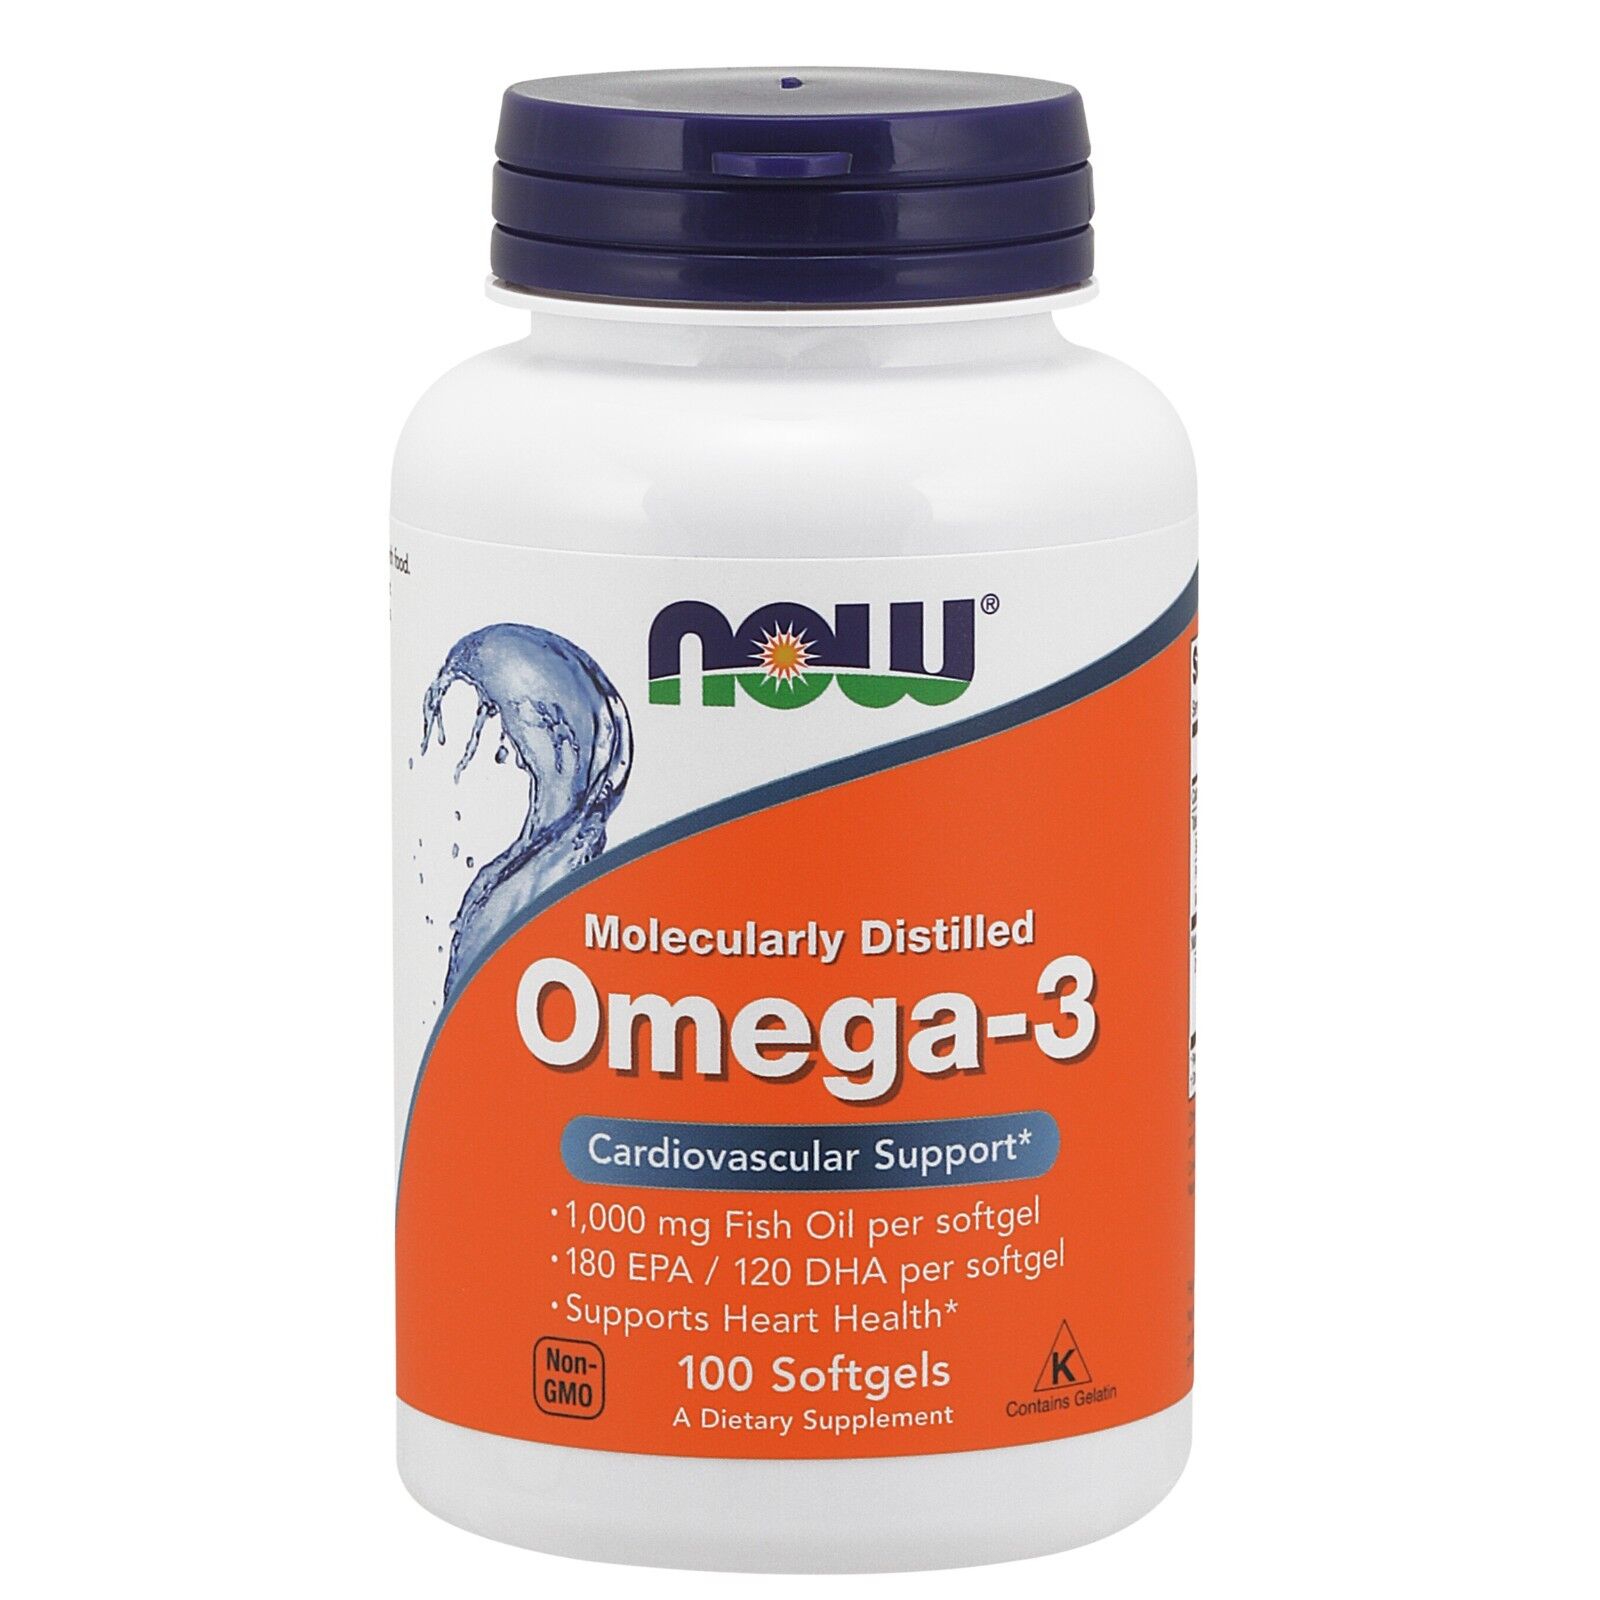 Snt omega 3 капсулы. Омега 3 Now 1000mg. Now Omega 3 1000 MG. Омега-3 Now foods, 100 капсул. Now Omega-3 (100 капсул).